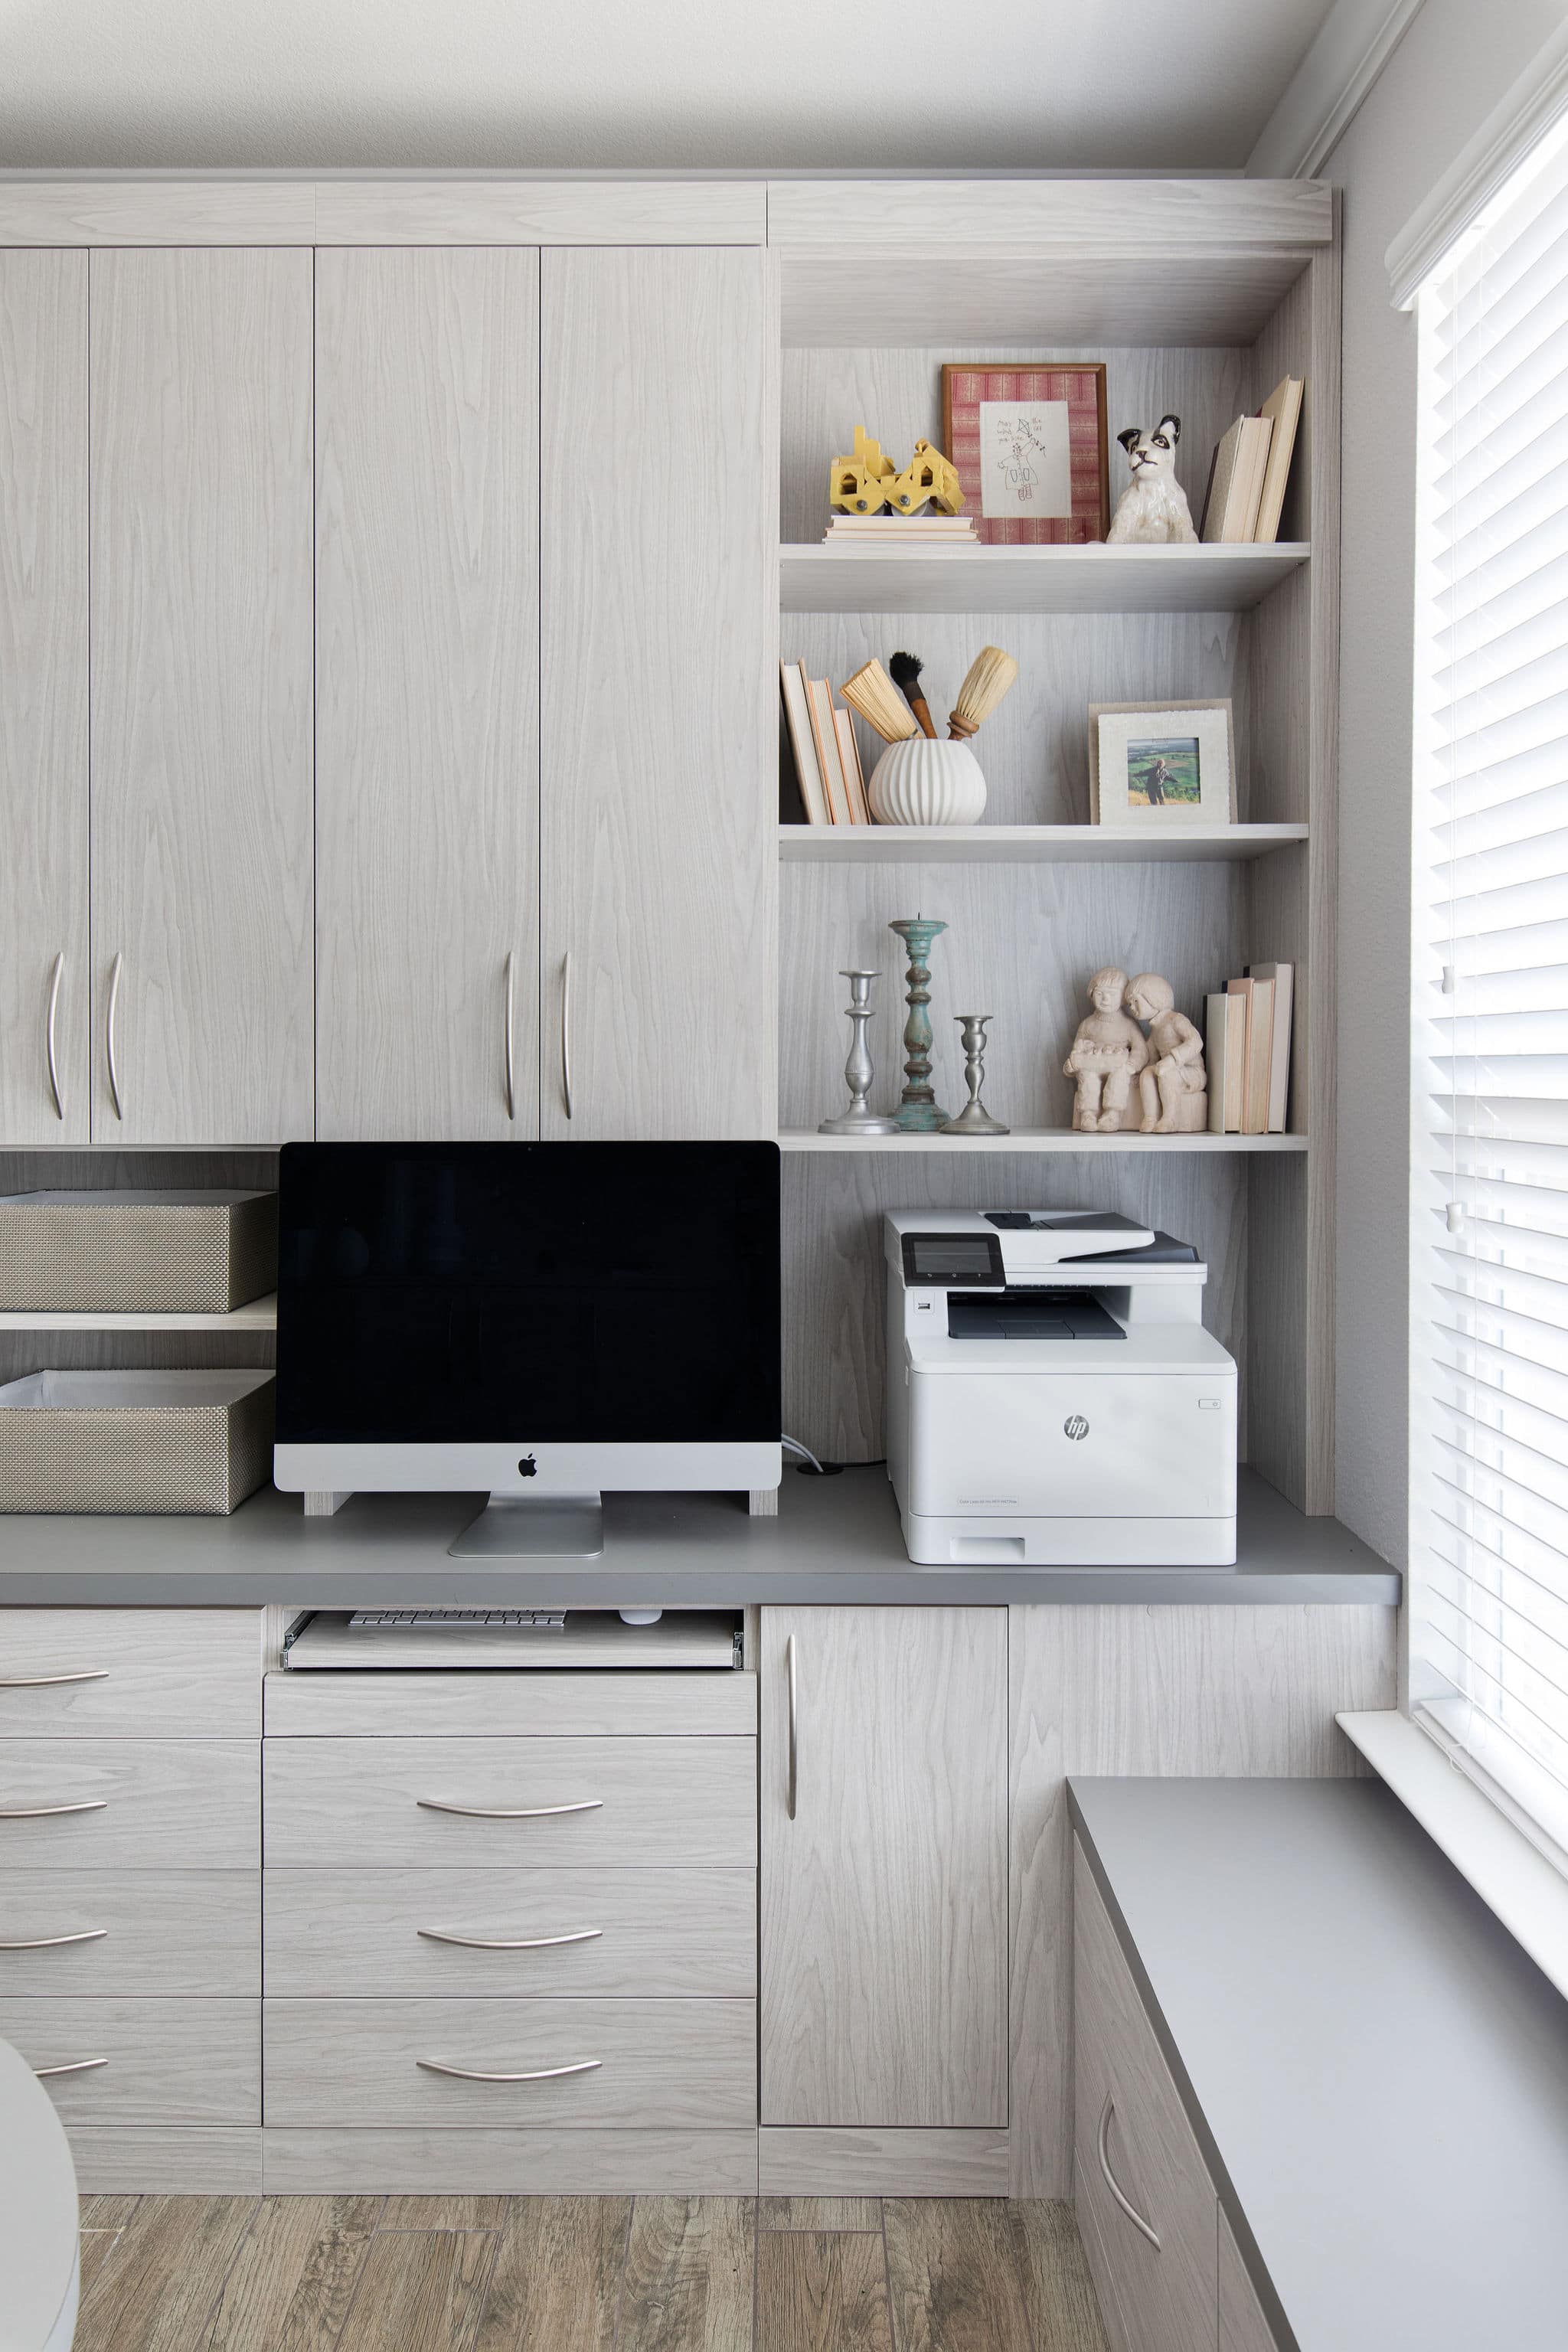 A home office space with a pull-out keyboard drawer and room for computer and printer